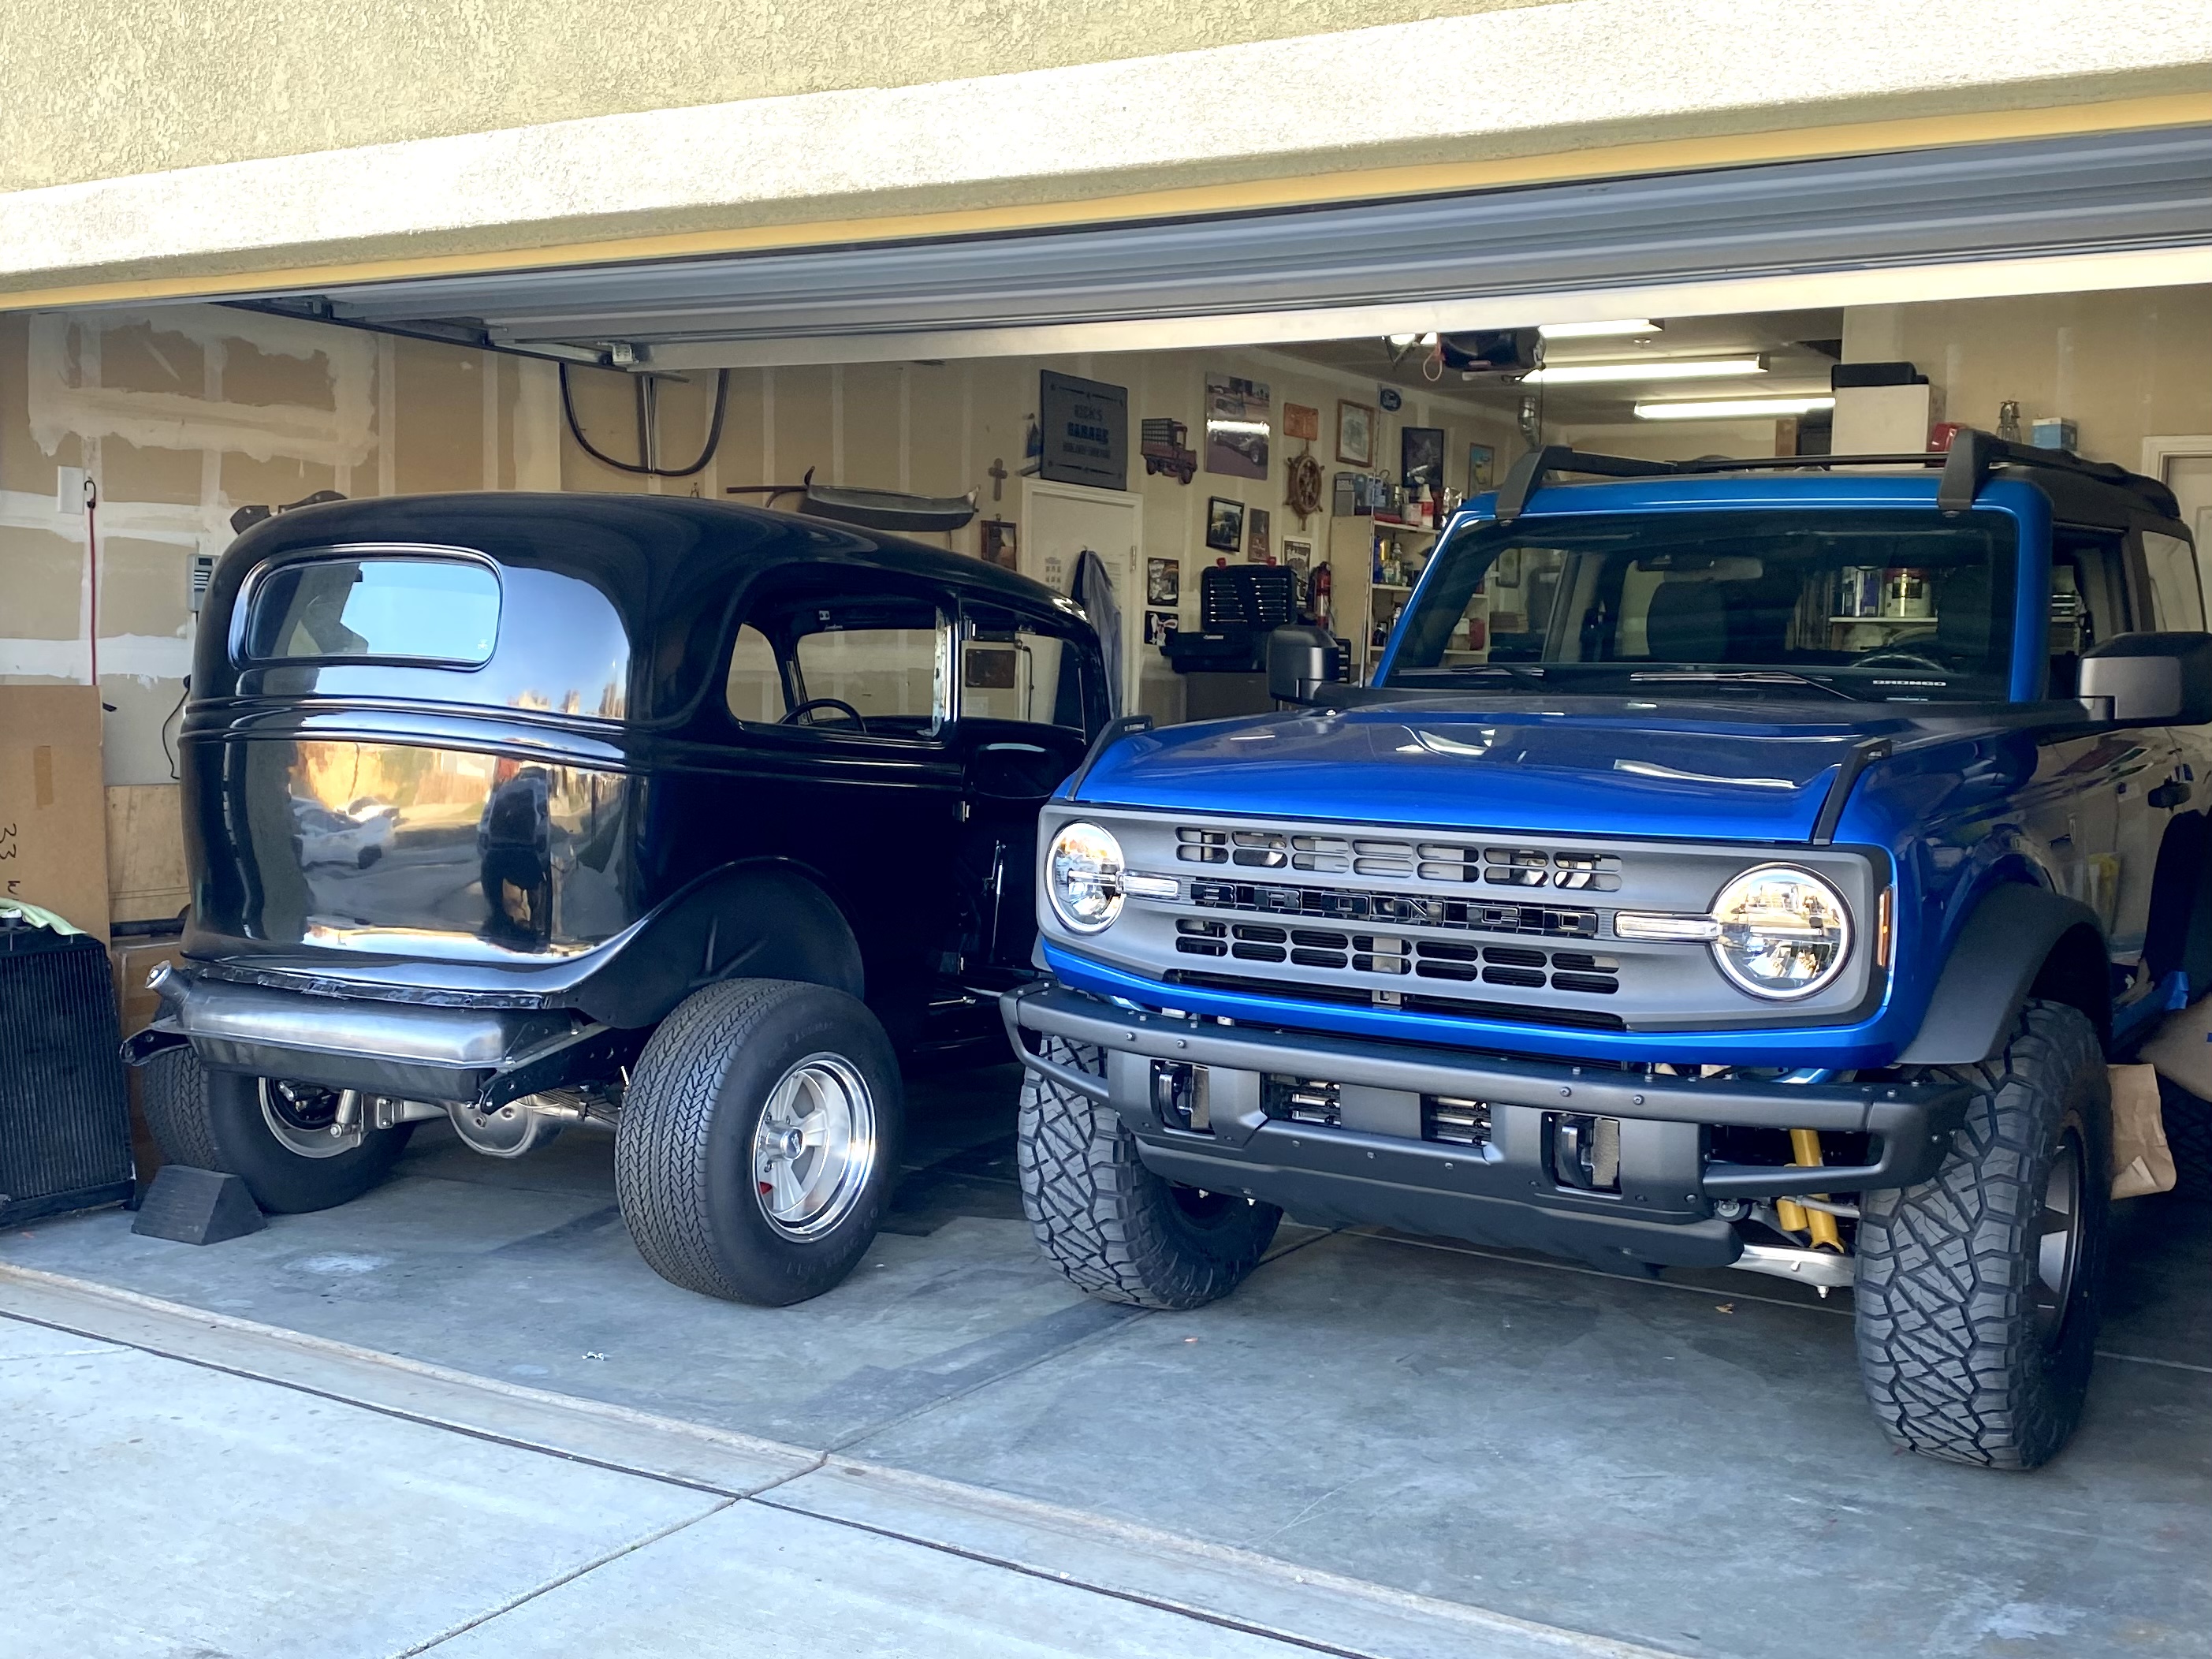 Ford Bronco Garage Makeover For Your Bronco? Show Yours 📸 D932668D-8CF9-4AEE-89DC-43CCDC991973